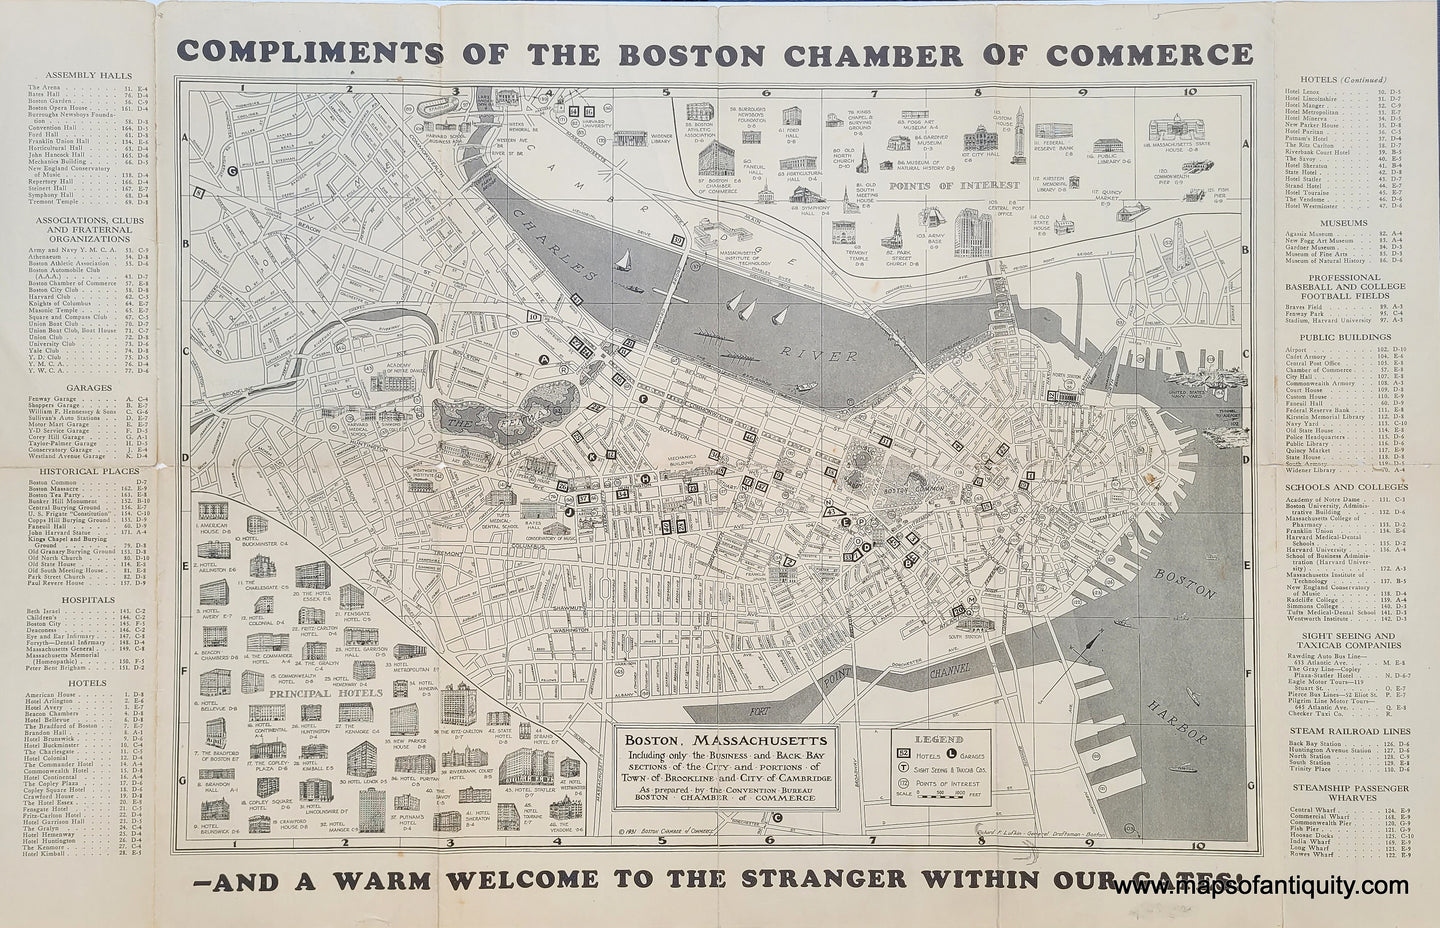 Genuine-Antique-Map-Boston-Massachusetts-Including-only-the-Business-and-Back-Bay-sections-of-the-City-and-portions-of-the-Town-of-Brookline-and-City-of-Cambridge--1931-Lufkin-Boston-Chamber-of-Commerce-Maps-Of-Antiquity